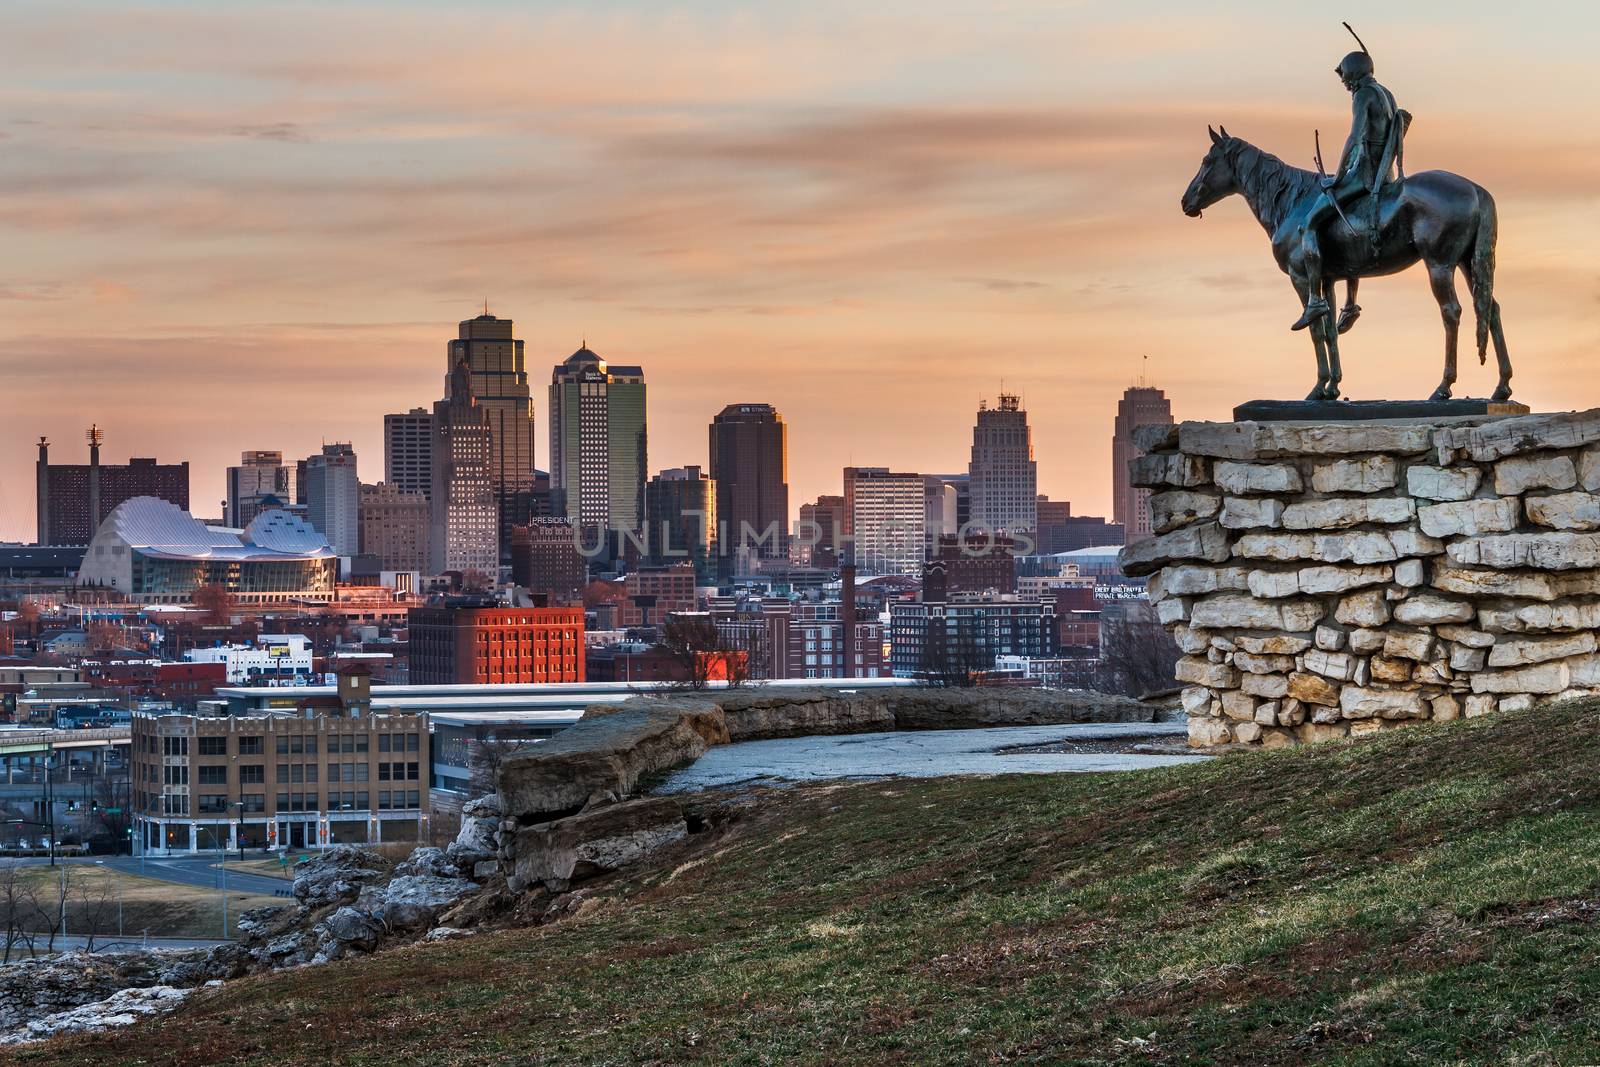 Kansas City, Missouri, USA on March 22, 2014.  A image of the Kansas City Scout overlooking Kansas City at sunrise.  The Indian Scout is known as a Kansas City landmark and symbol of the city. The scout overlooks the Kansas City Skyline.